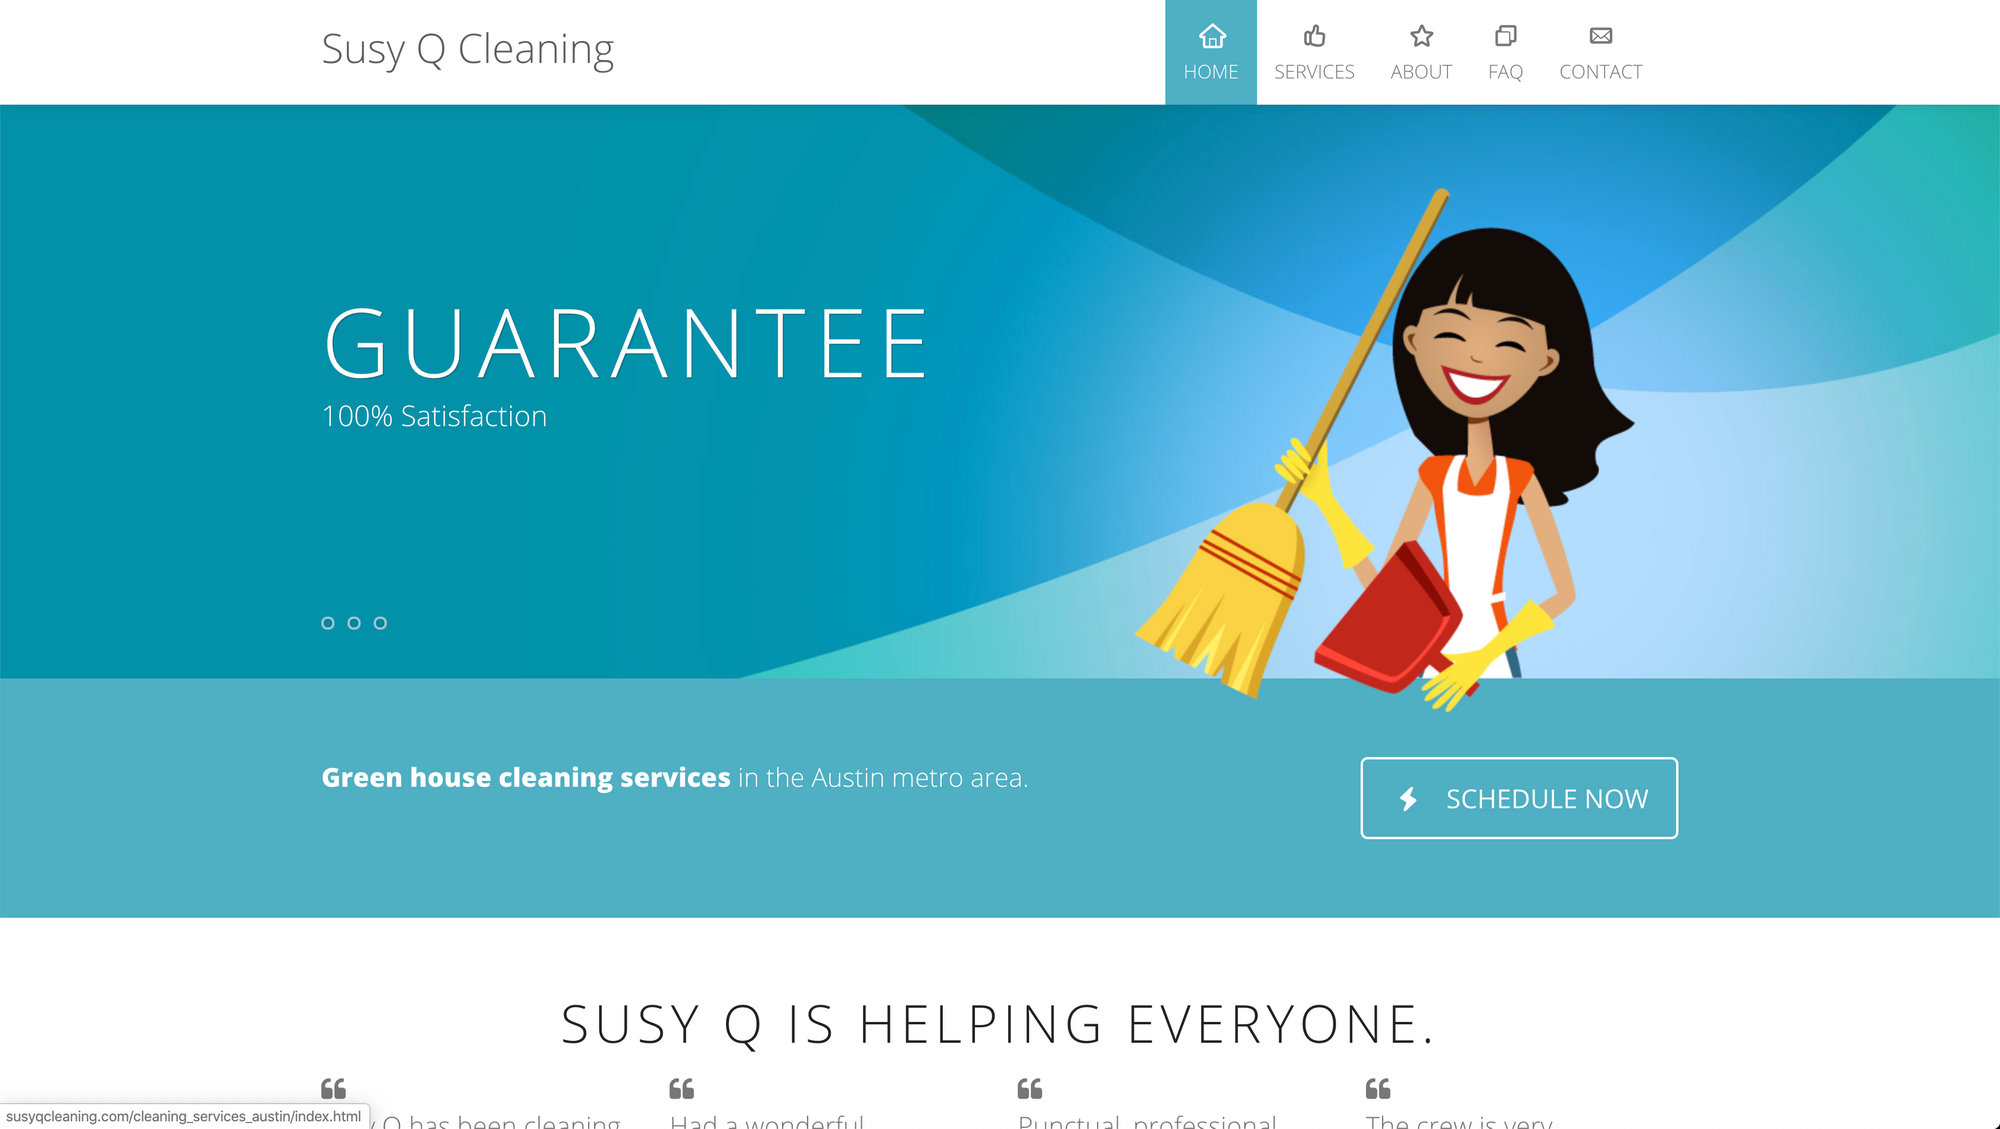 Susy Q Cleaning